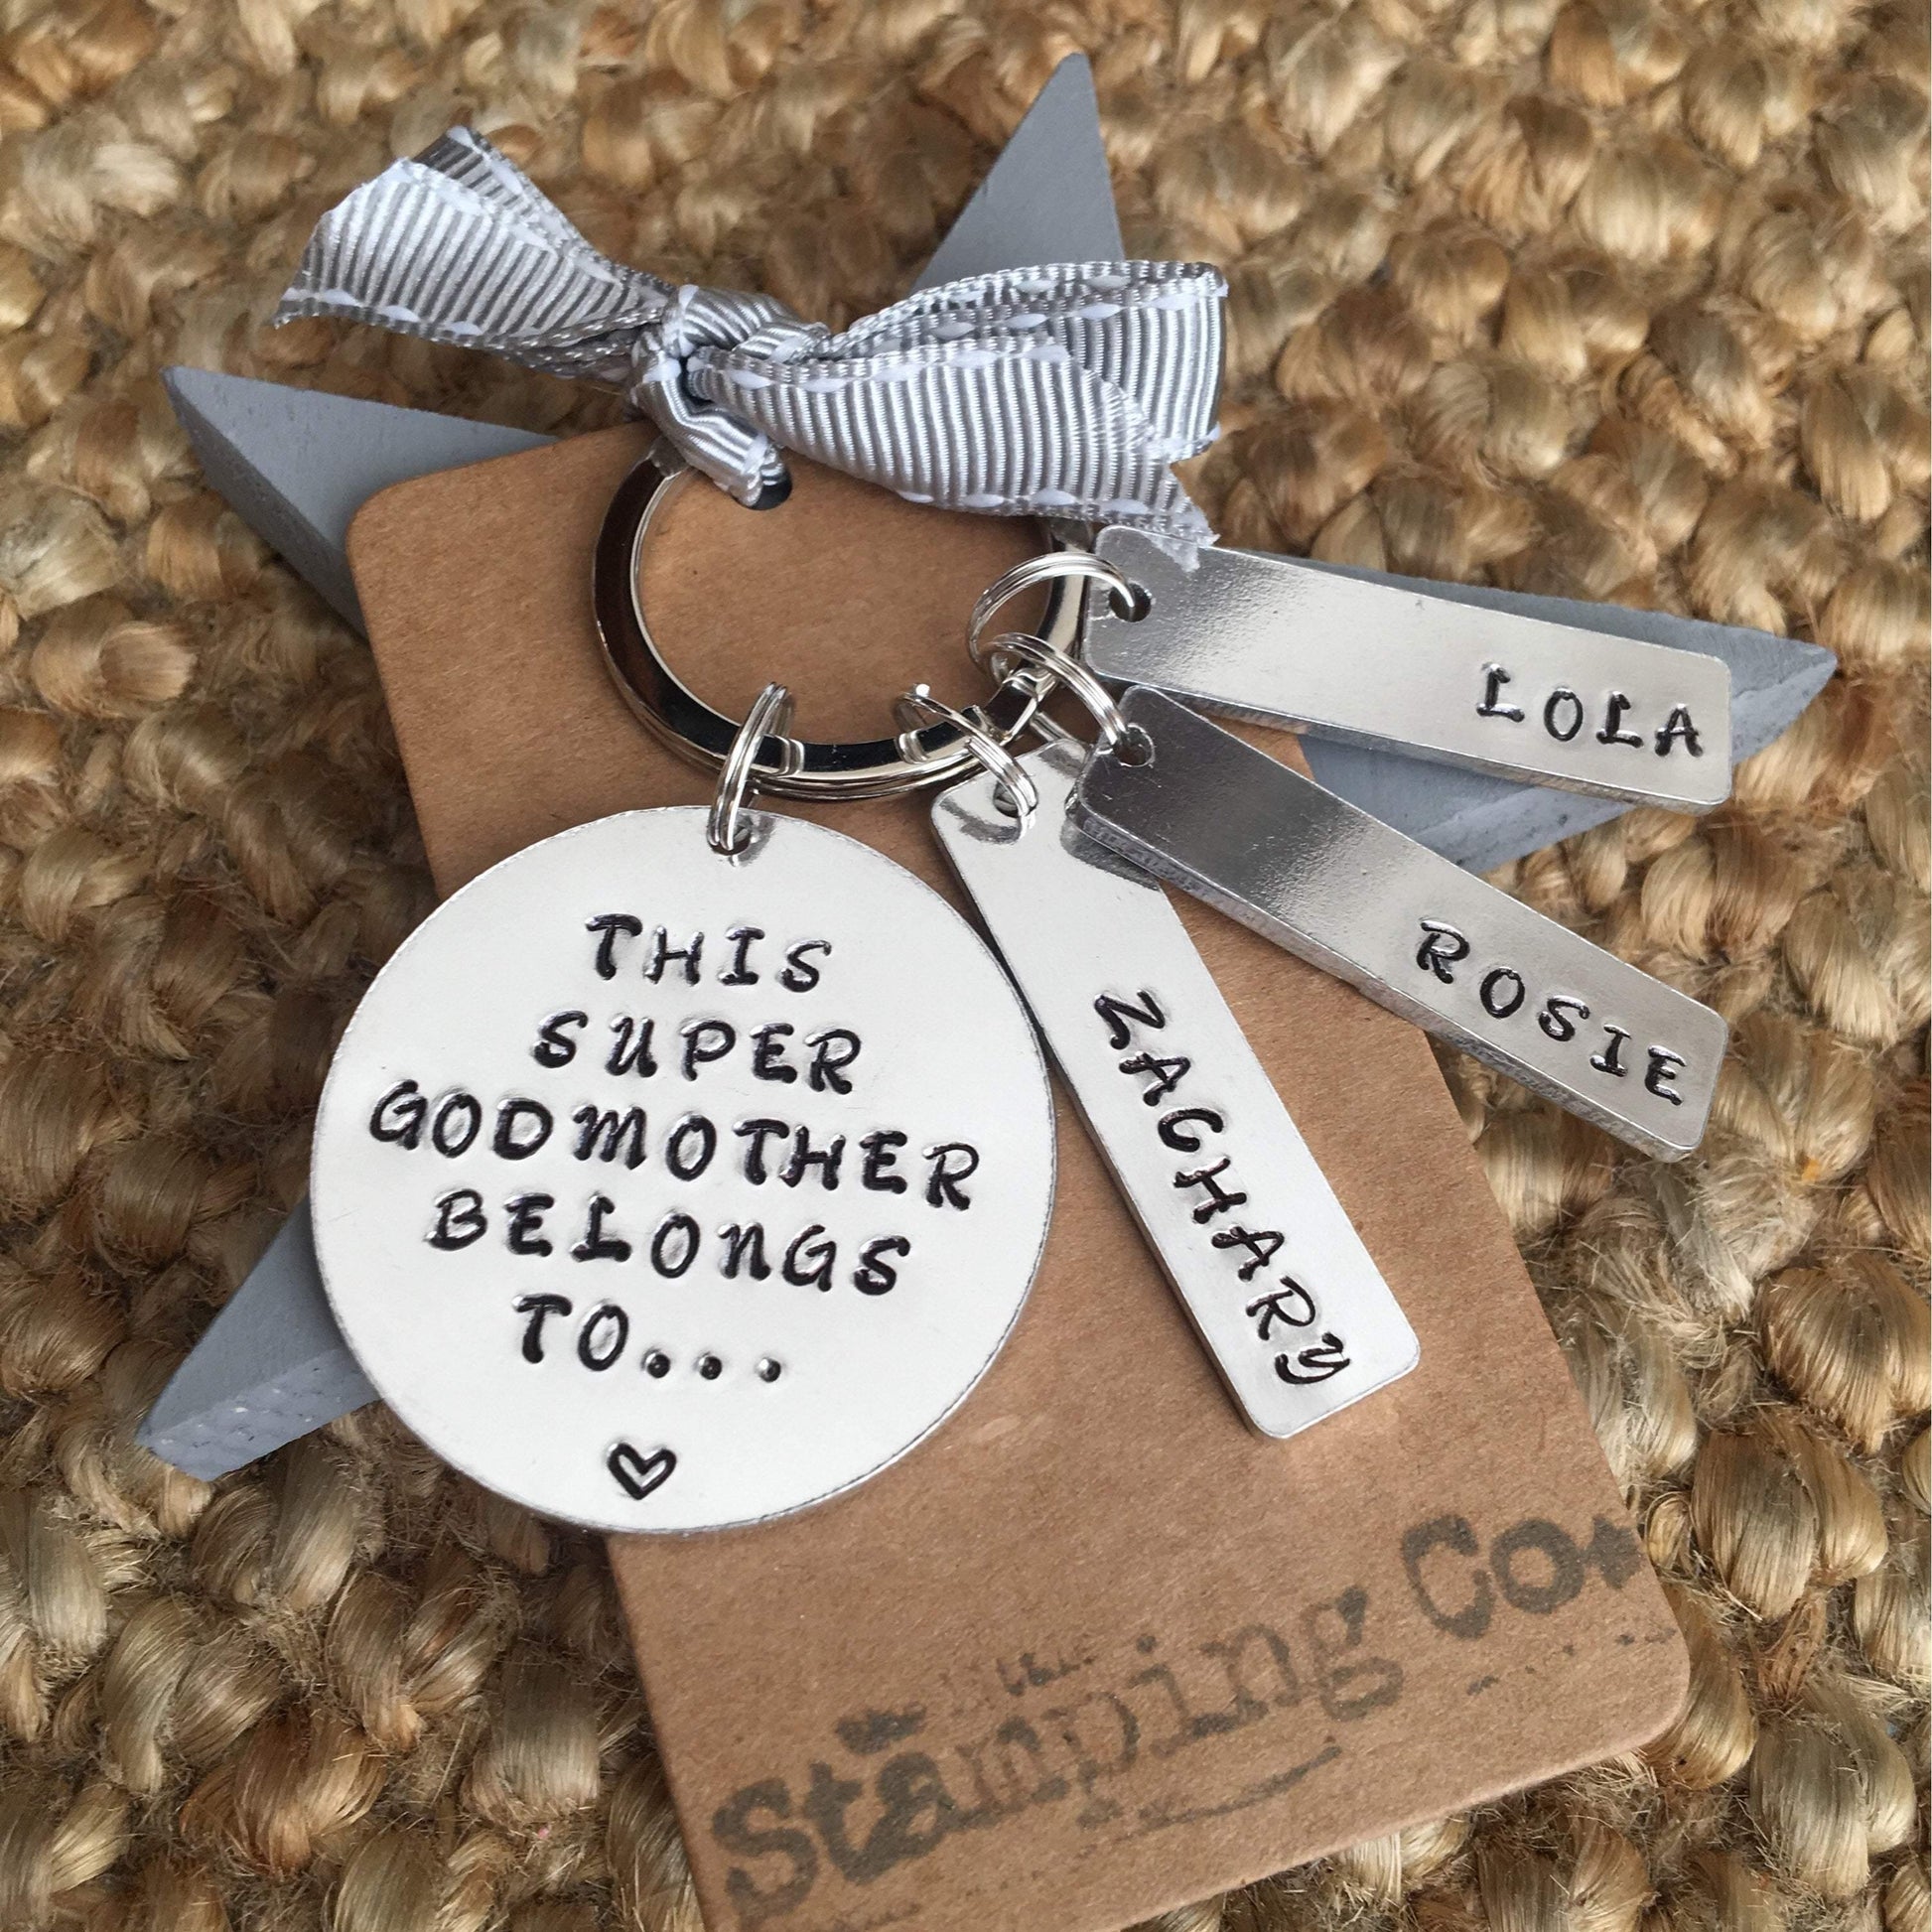 Godmother Gift, Godfather Gift, Personalised Keyring, Christening, Godmother Gift Ideas, Hand Stamped - The Little Stamping Co.